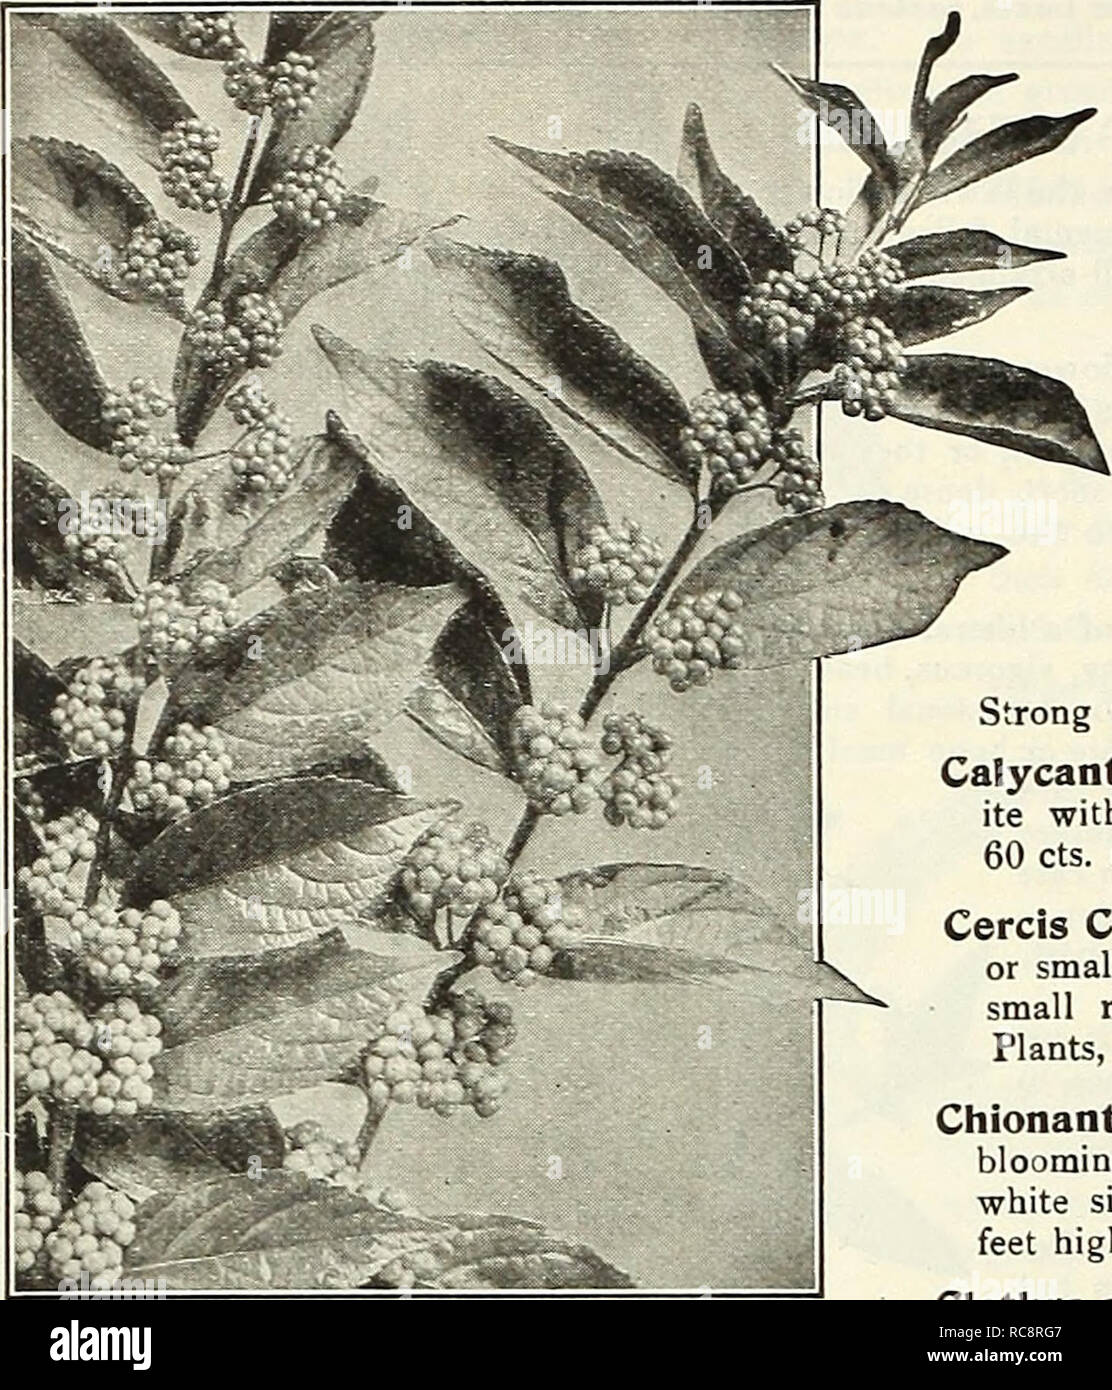 . Dreer's garden book 1922. Seeds Catalogs; Nursery stock Catalogs; Gardening Equipment and supplies Catalogs; Flowers Seeds Catalogs; Vegetables Seeds Catalogs; Fruit Seeds Catalogs. 198 /flEHiyA.l)I» CHOICE HARDY SHRUBS &gt;HHifl»Elil&gt;Mlk. Callicarfa Porpubba Callicarpa Purpurea. A splendid berried Shrub for the border or planted in clumps on the lawn; it grows about 3 feet high, its branches gracefully recurving; these are covered in August with tiny pink-tinted flowers, followed in late Sep- tember by great masses of violet-purple berries, borne in clusters from the axil of every leaf, Stock Photo